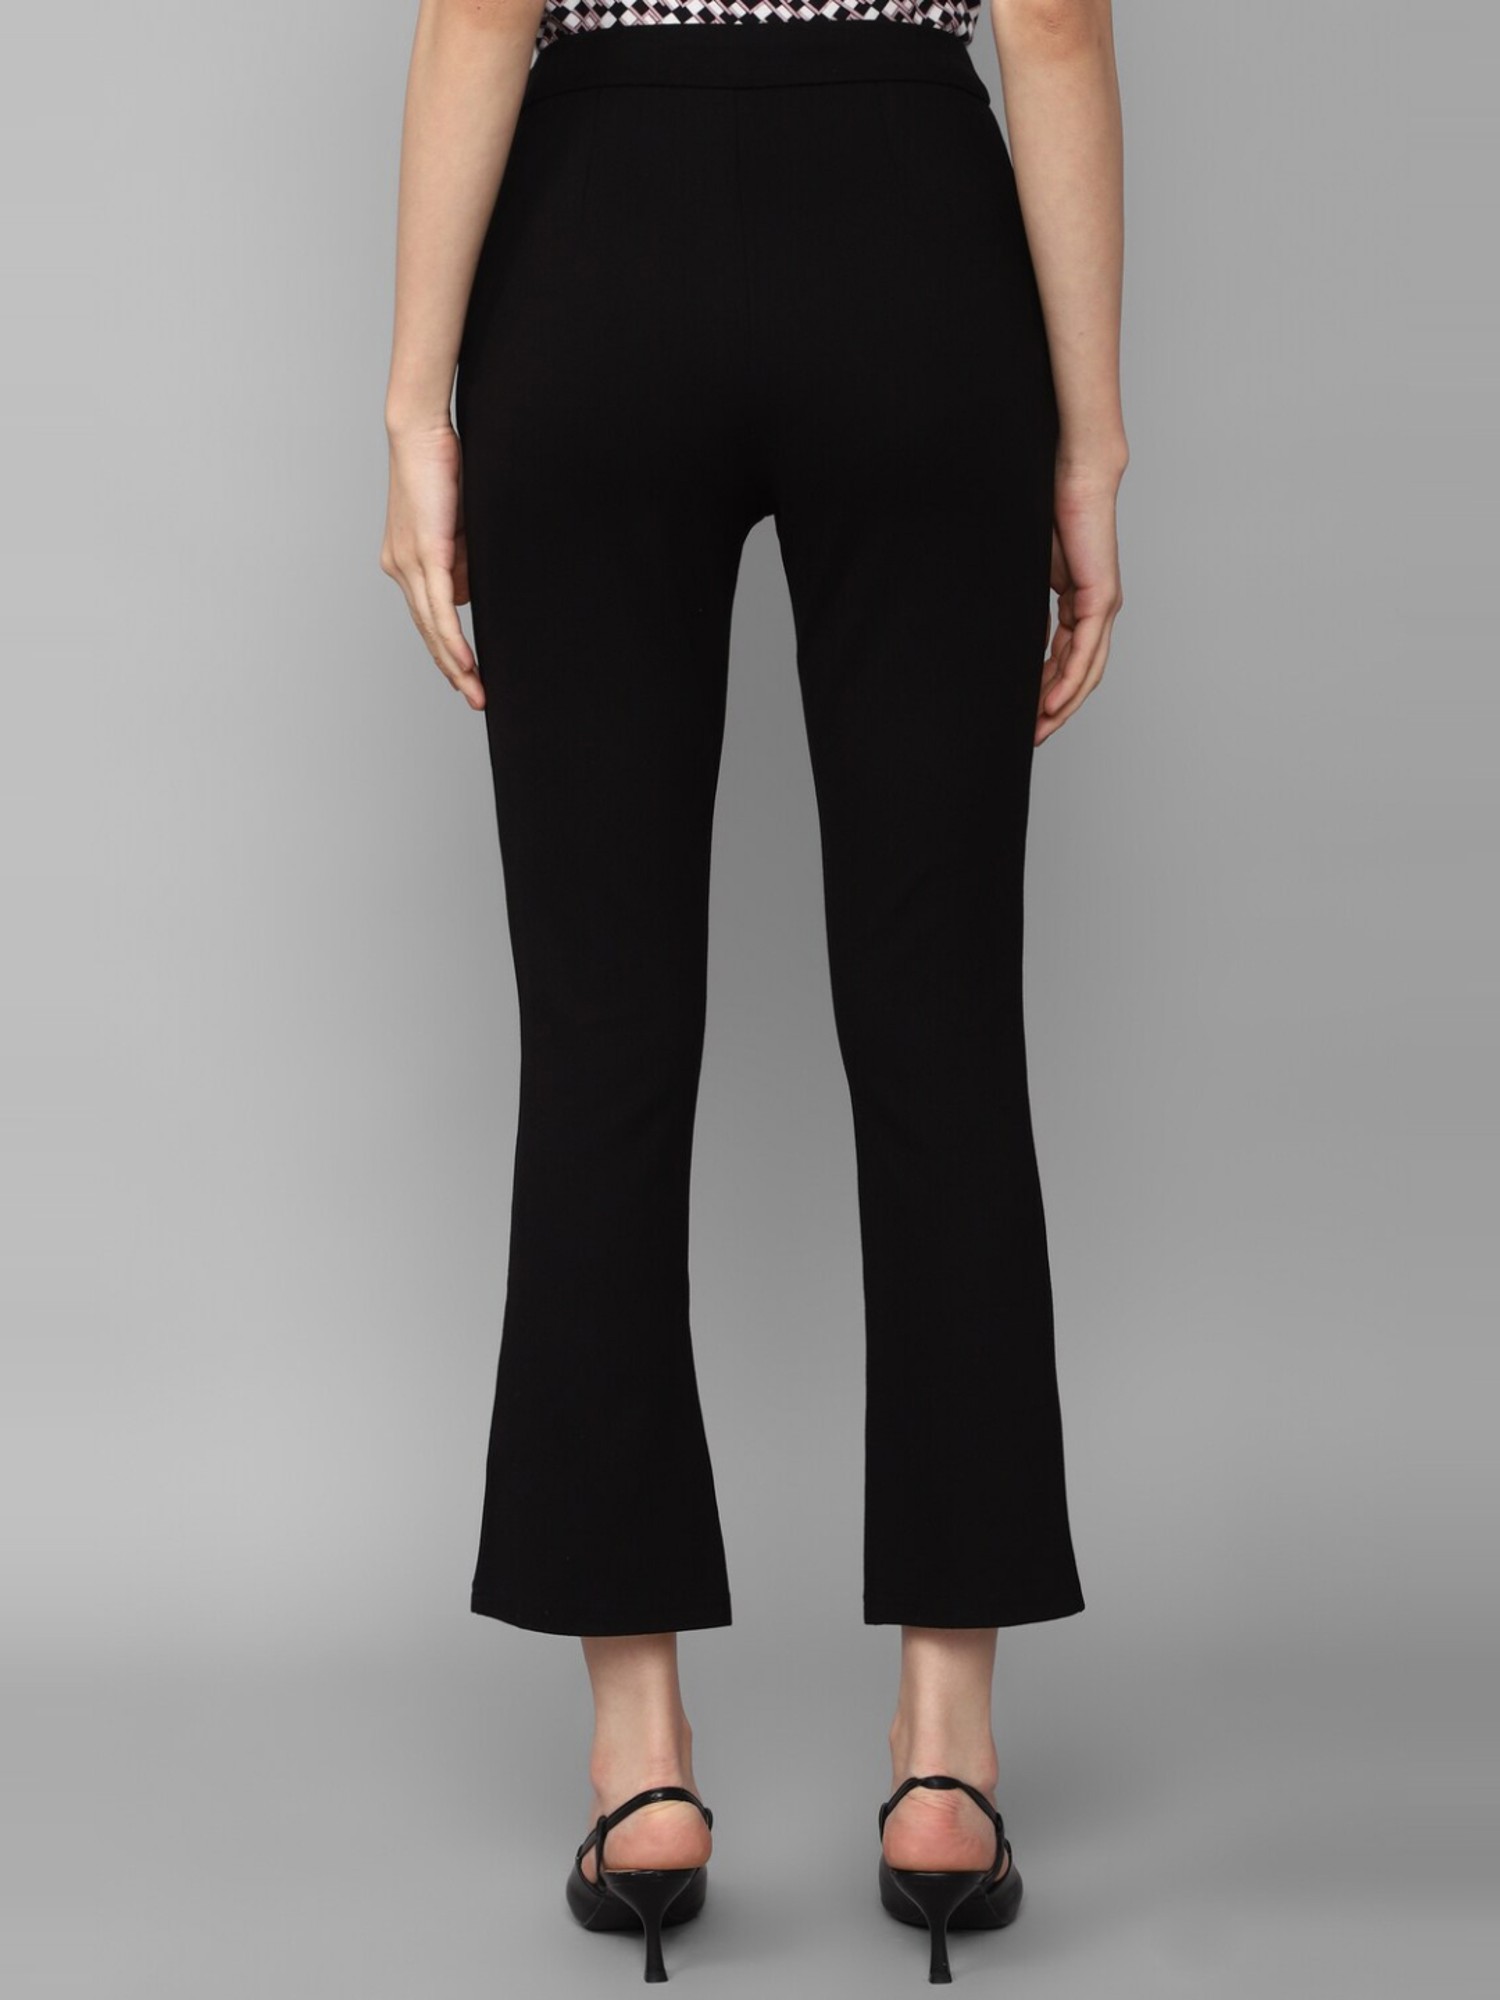 Allen Solly Black Trousers Buy Allen Solly Black Trousers Online at Best  Price in India  NykaaMan